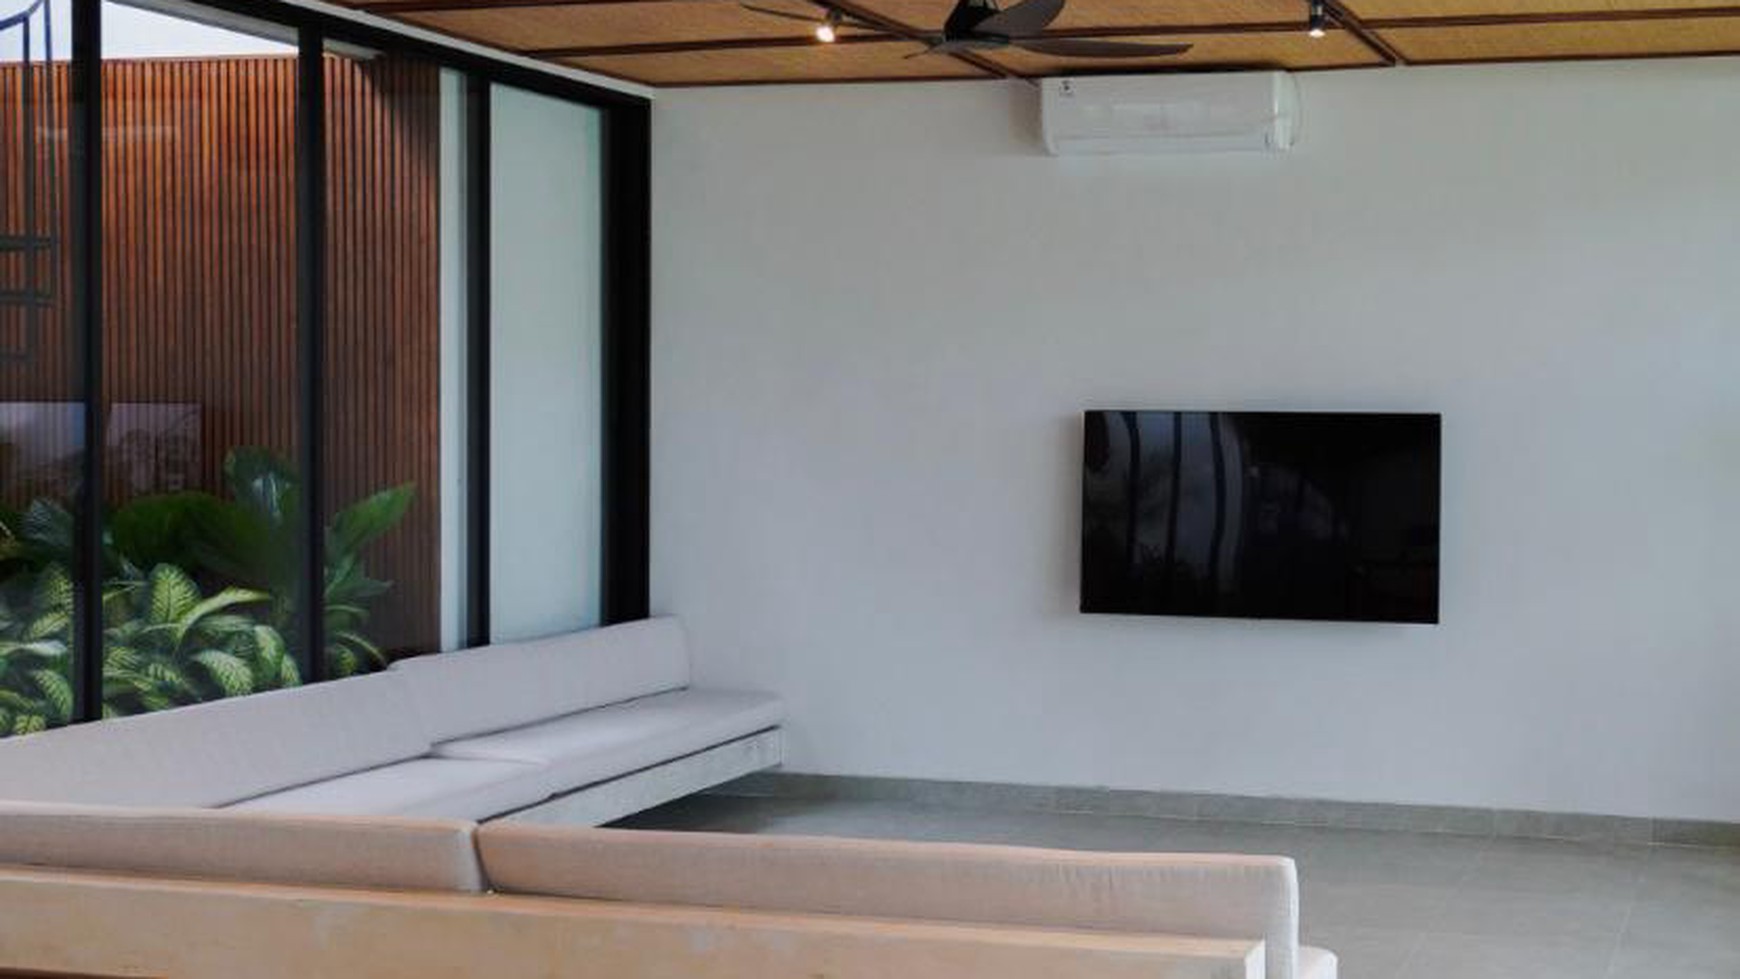 For Sale Leasehold - Brand new  modern villa  3 bedrooms in the heart of Berawa , Canggu 